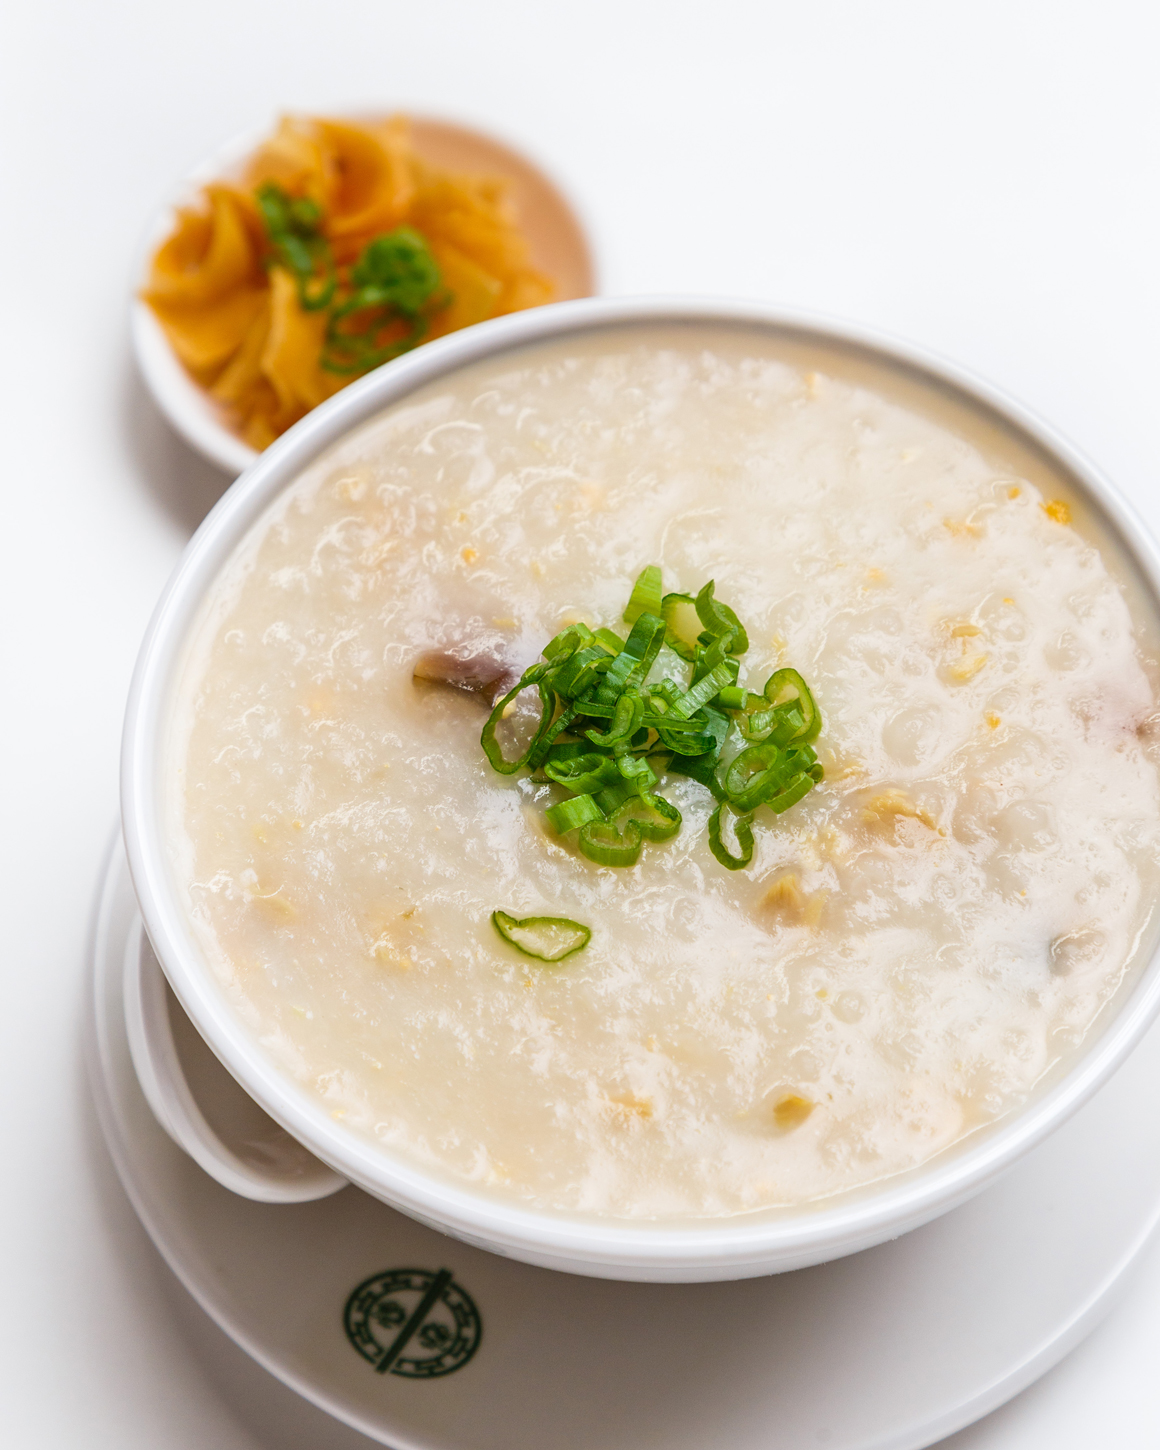 https://shachu.club/wp/wp-content/uploads/2021/04/4.Congee-with-Pork-and-Preserved-Egg.jpg